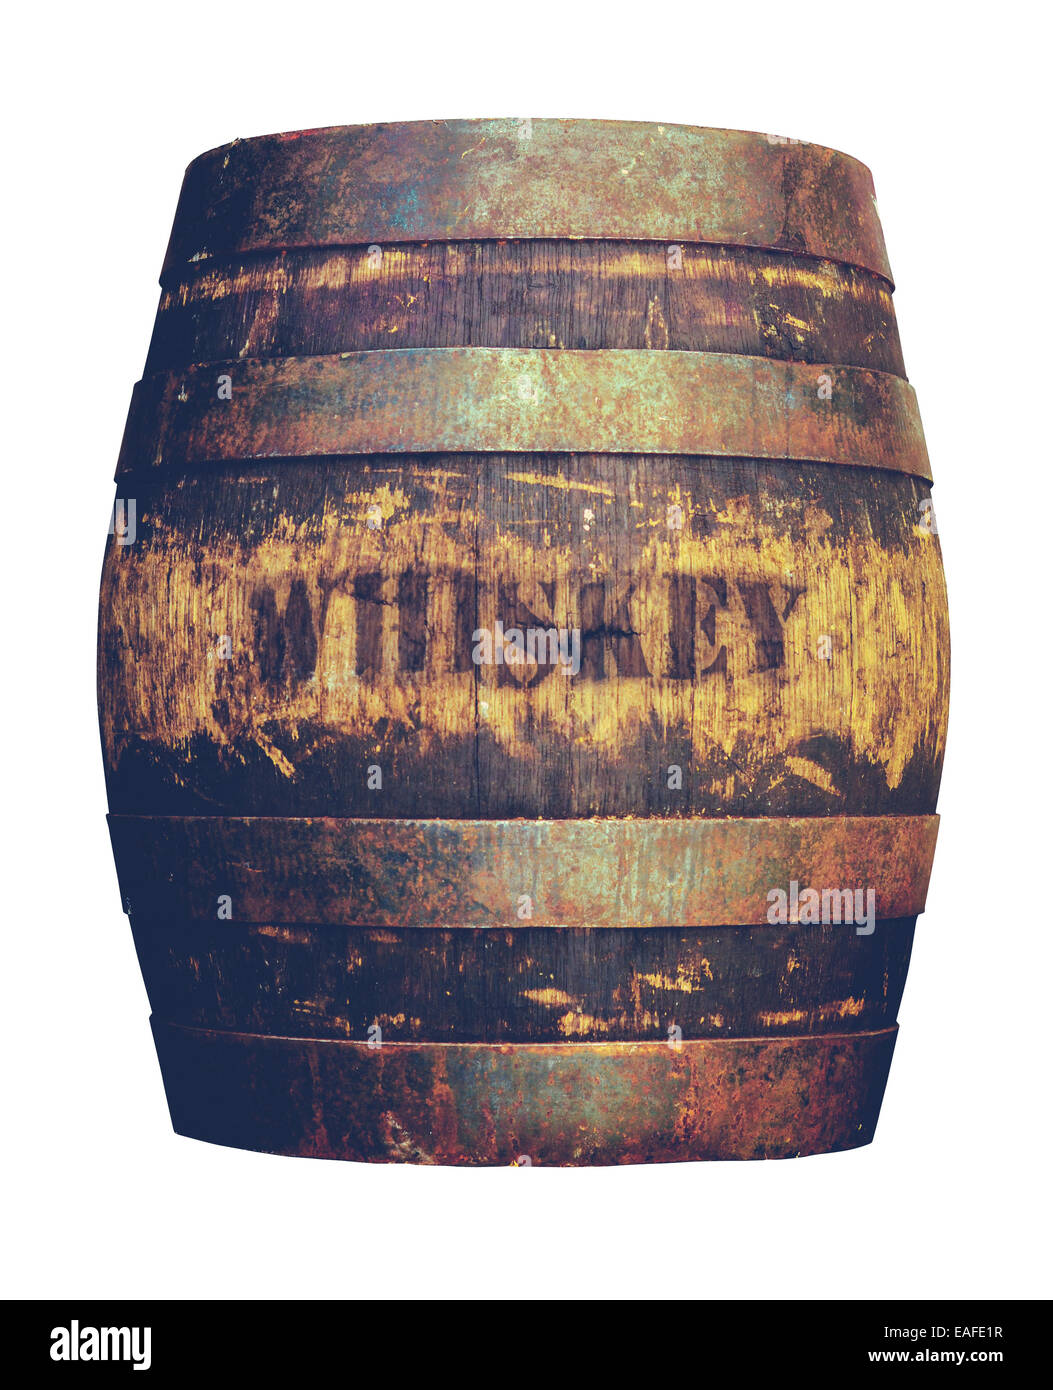 Old Wooden Whiskey Barrel Stock Photo - Alamy